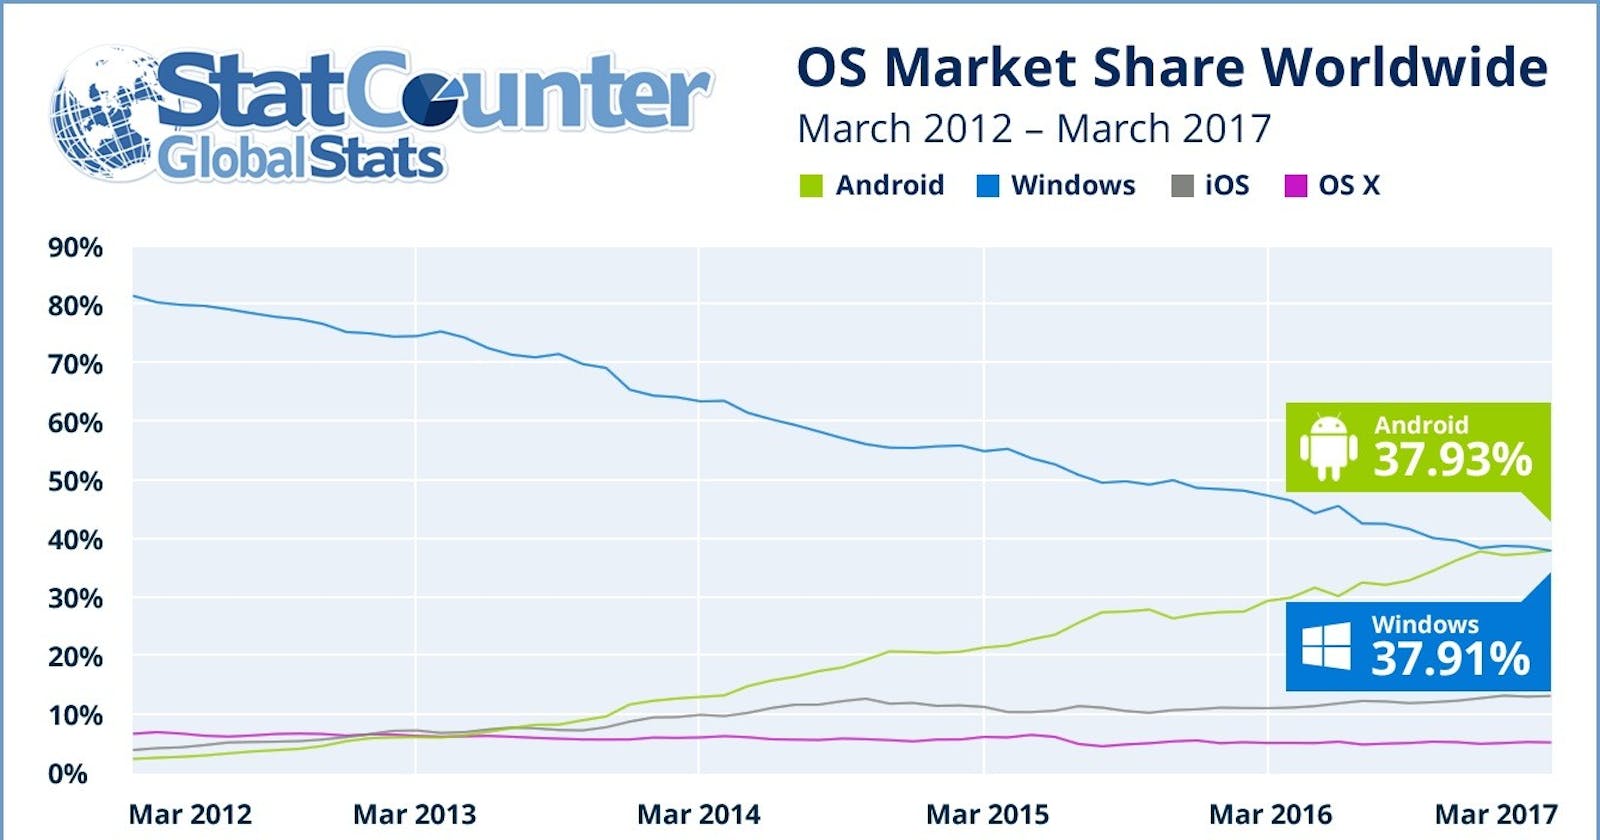 Google's Android Overtakes Windows as the World's Number 1 Operating System